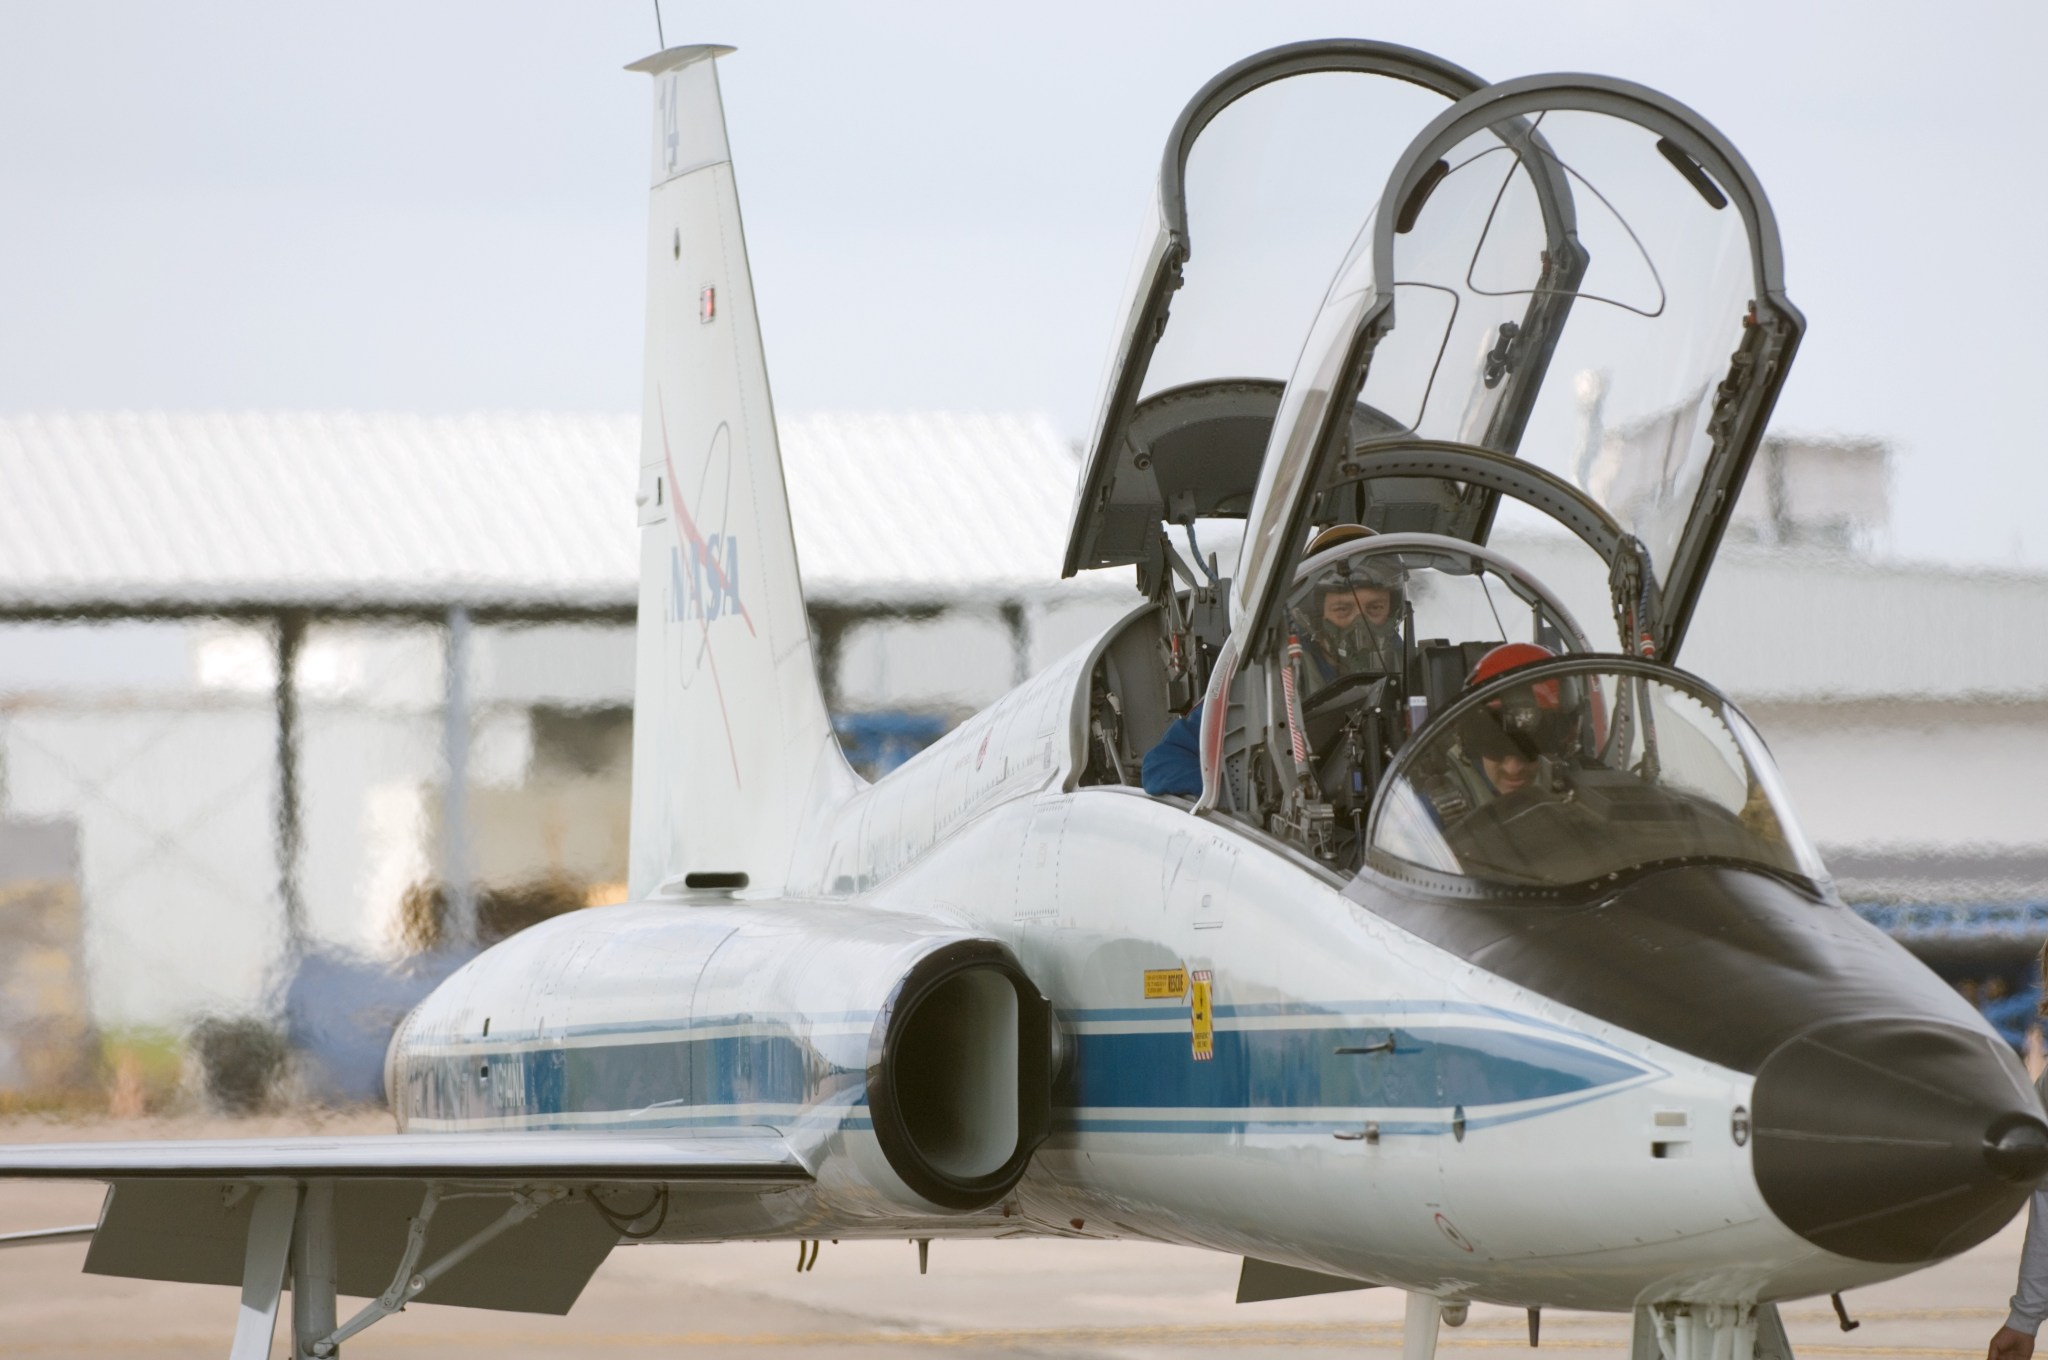 A small white jet sits on a runway with two astronauts in its seats and the two canopies opened